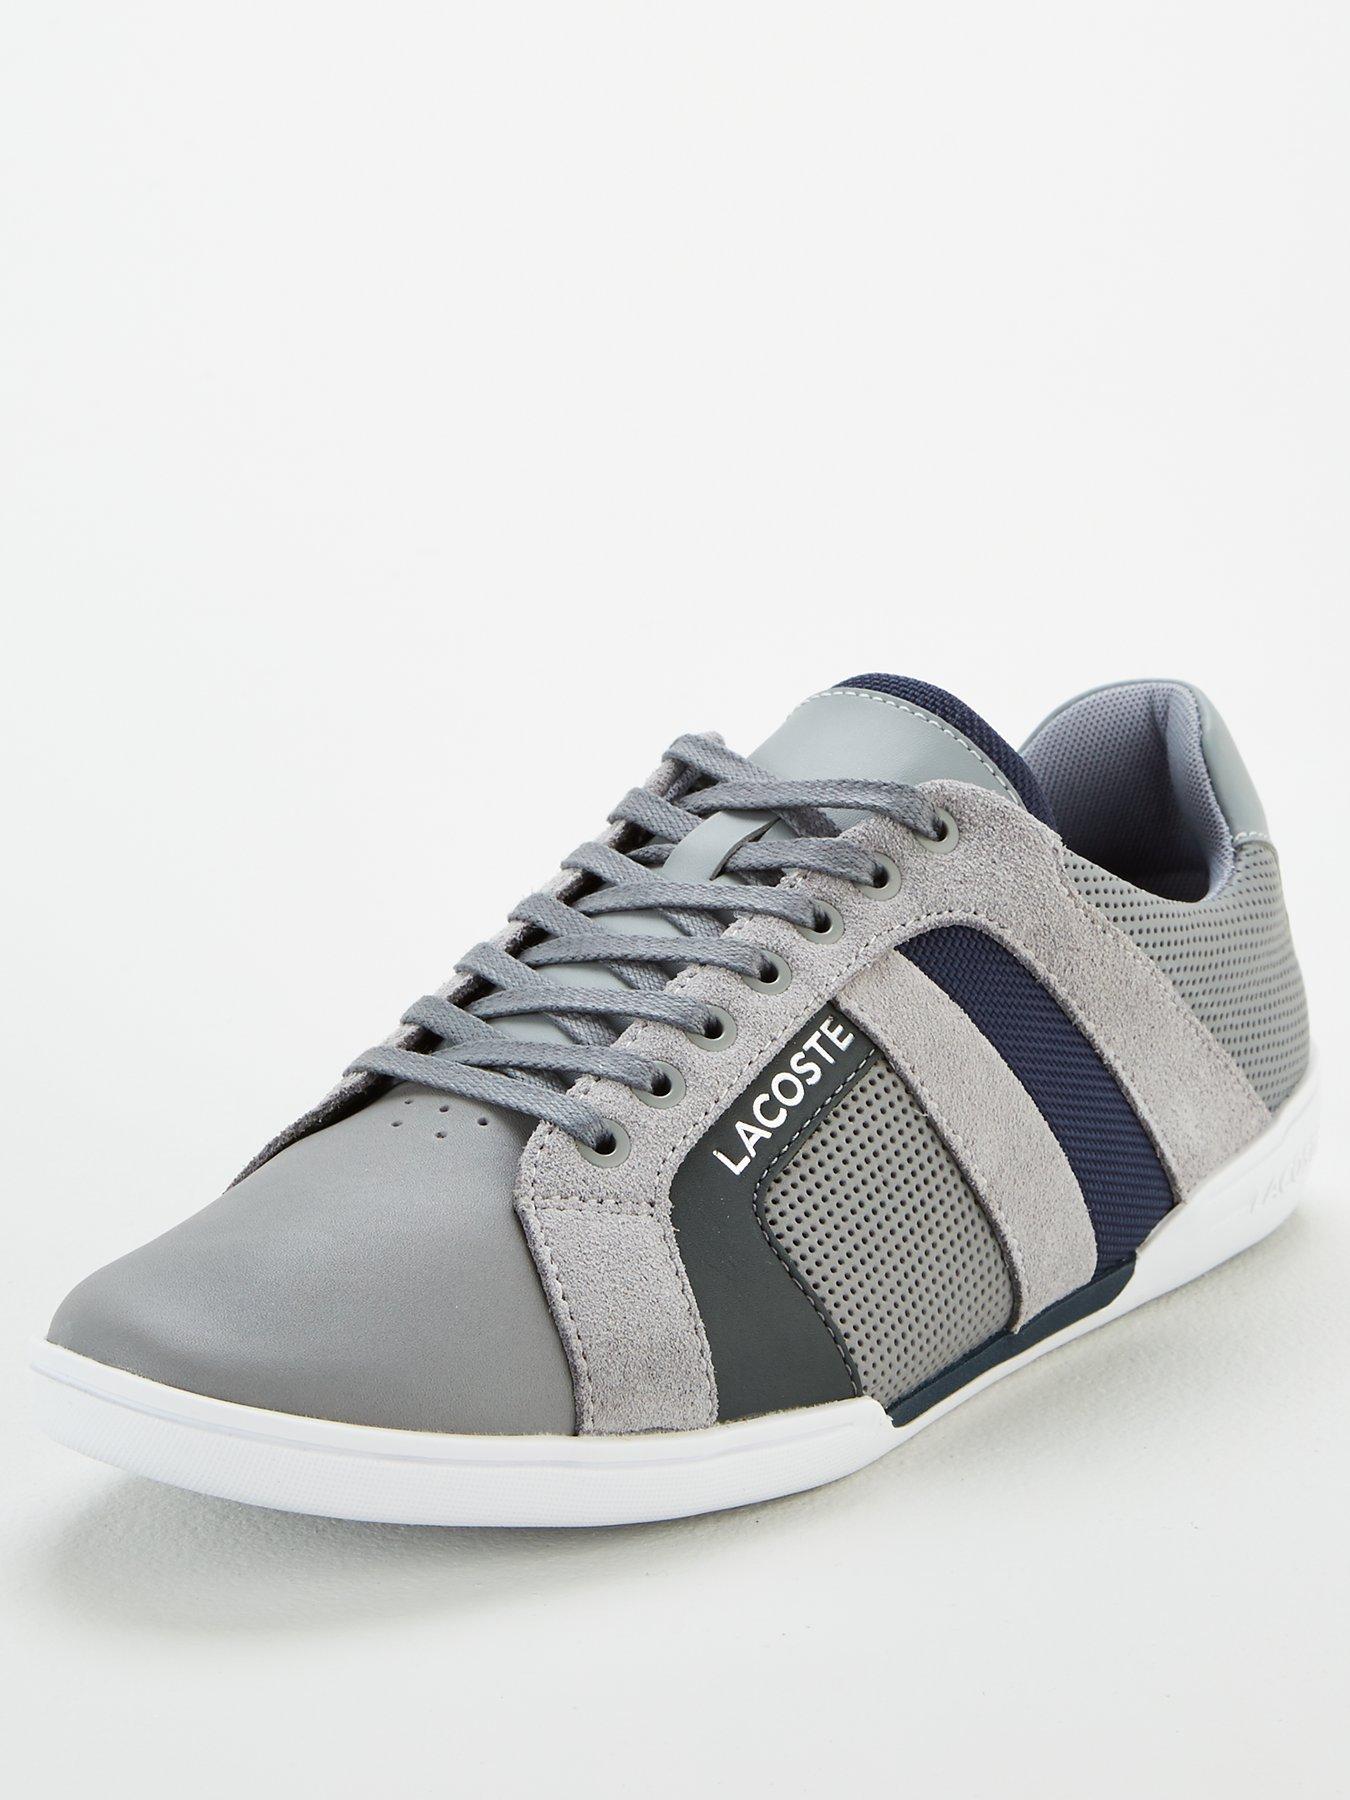 lacoste shoes grey leather